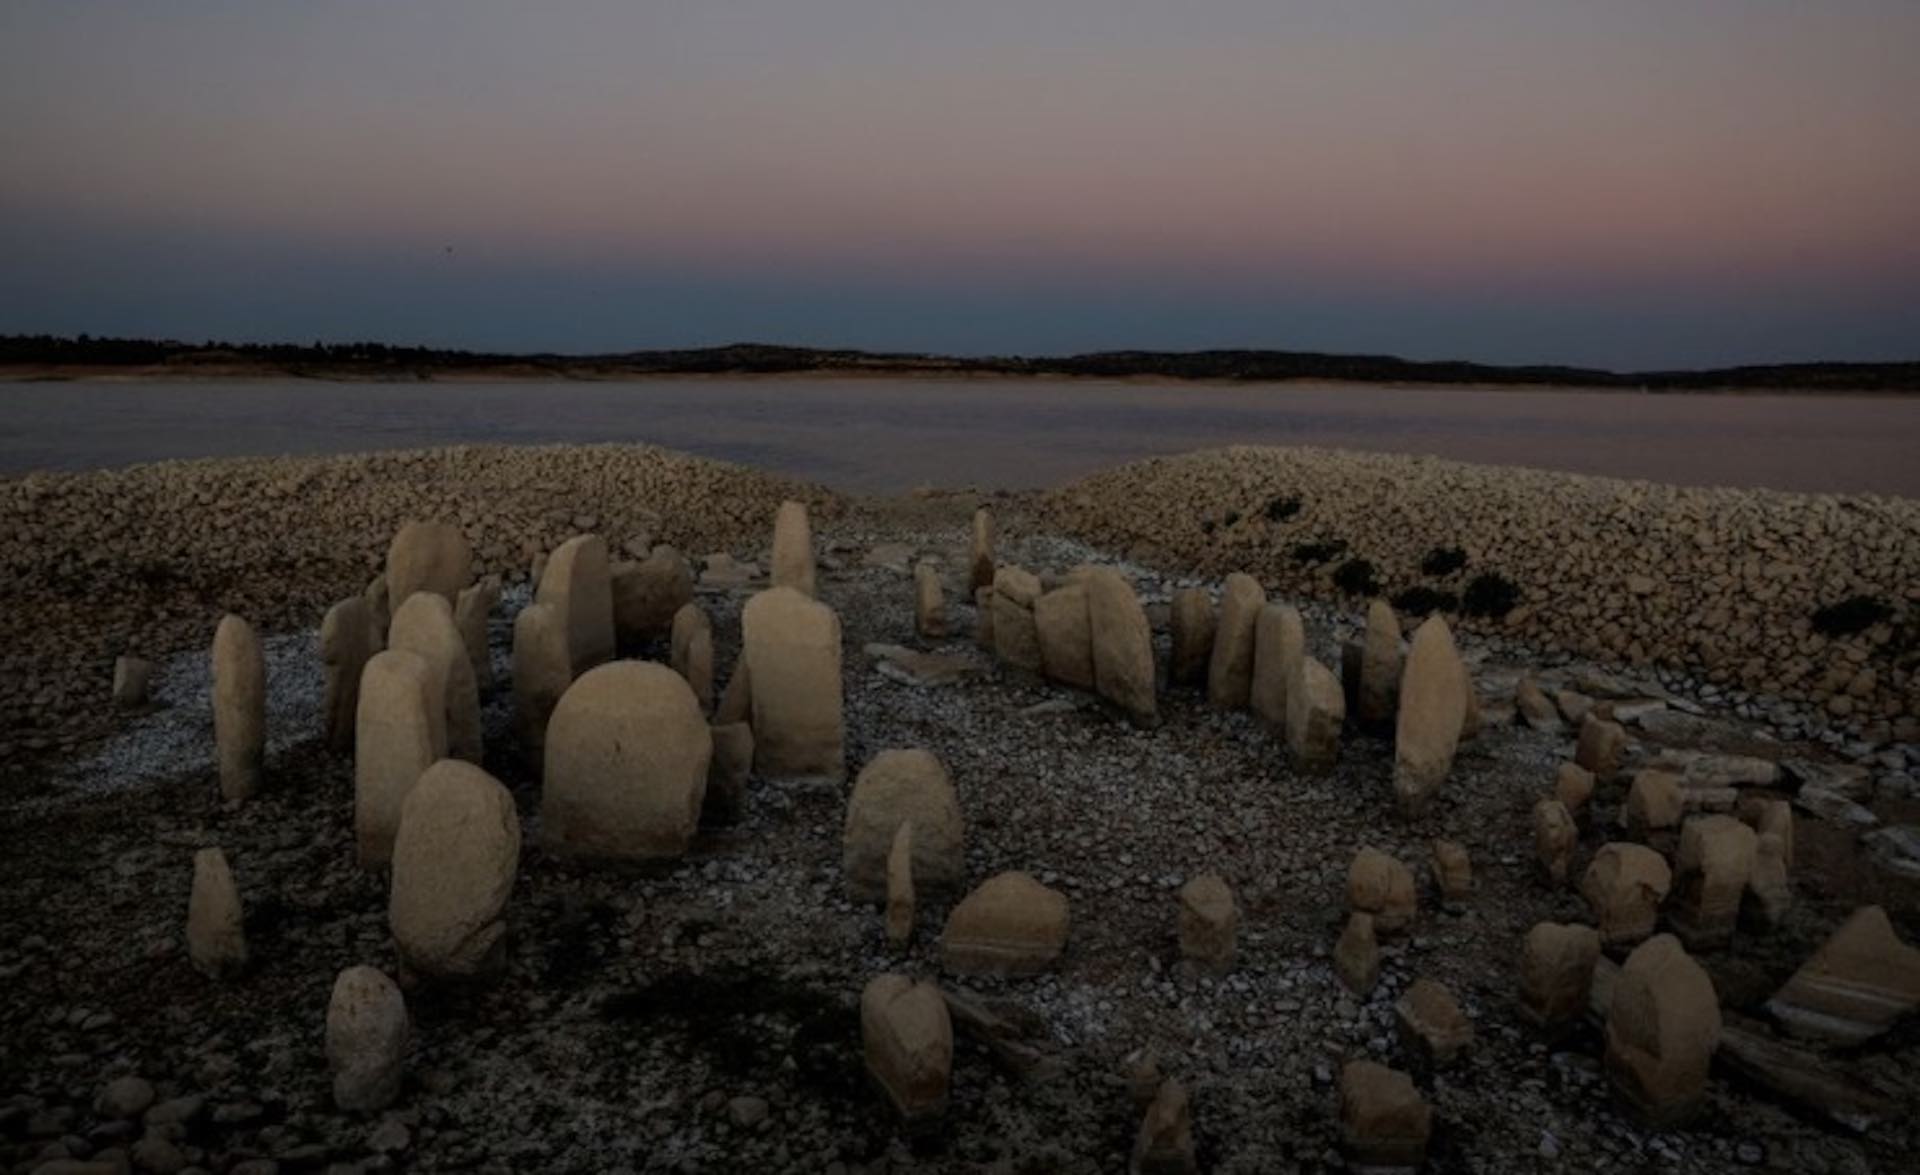 Drought reveals ancient stones and ships from World War II in Europe